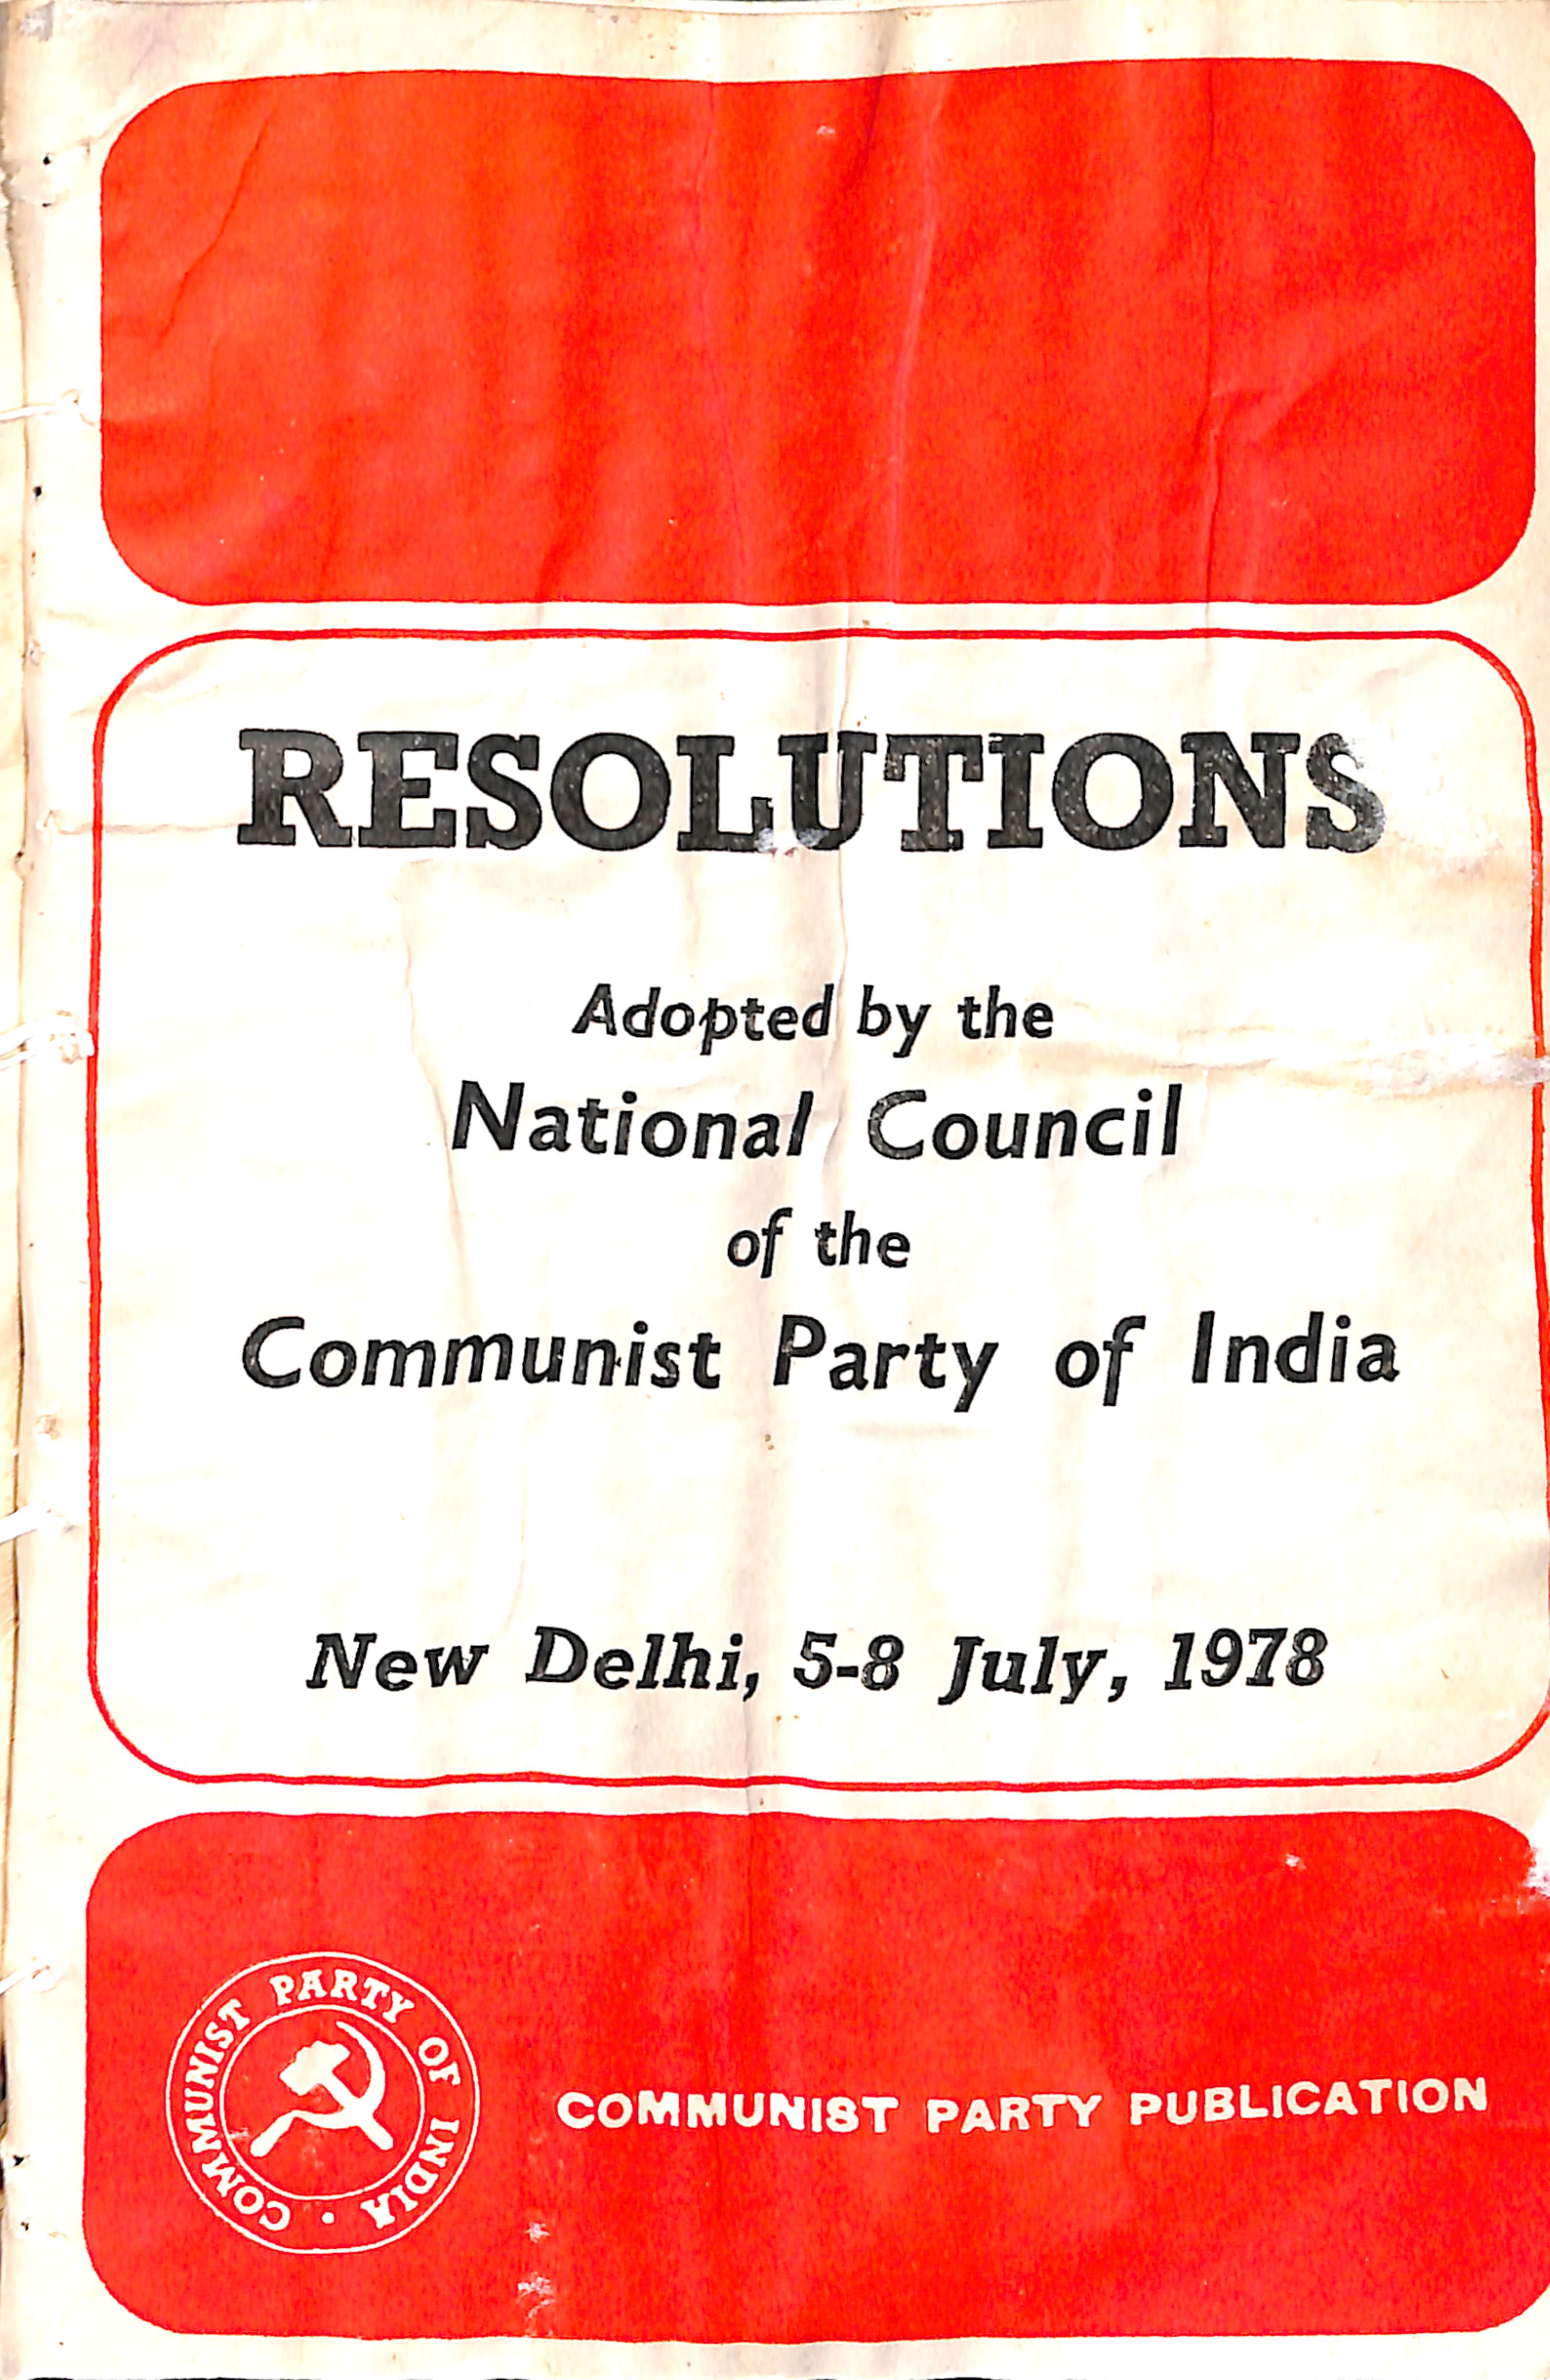 Resolutions adopted by the national council of the communist party of ondia (new delhi, 5-8 july,1978)